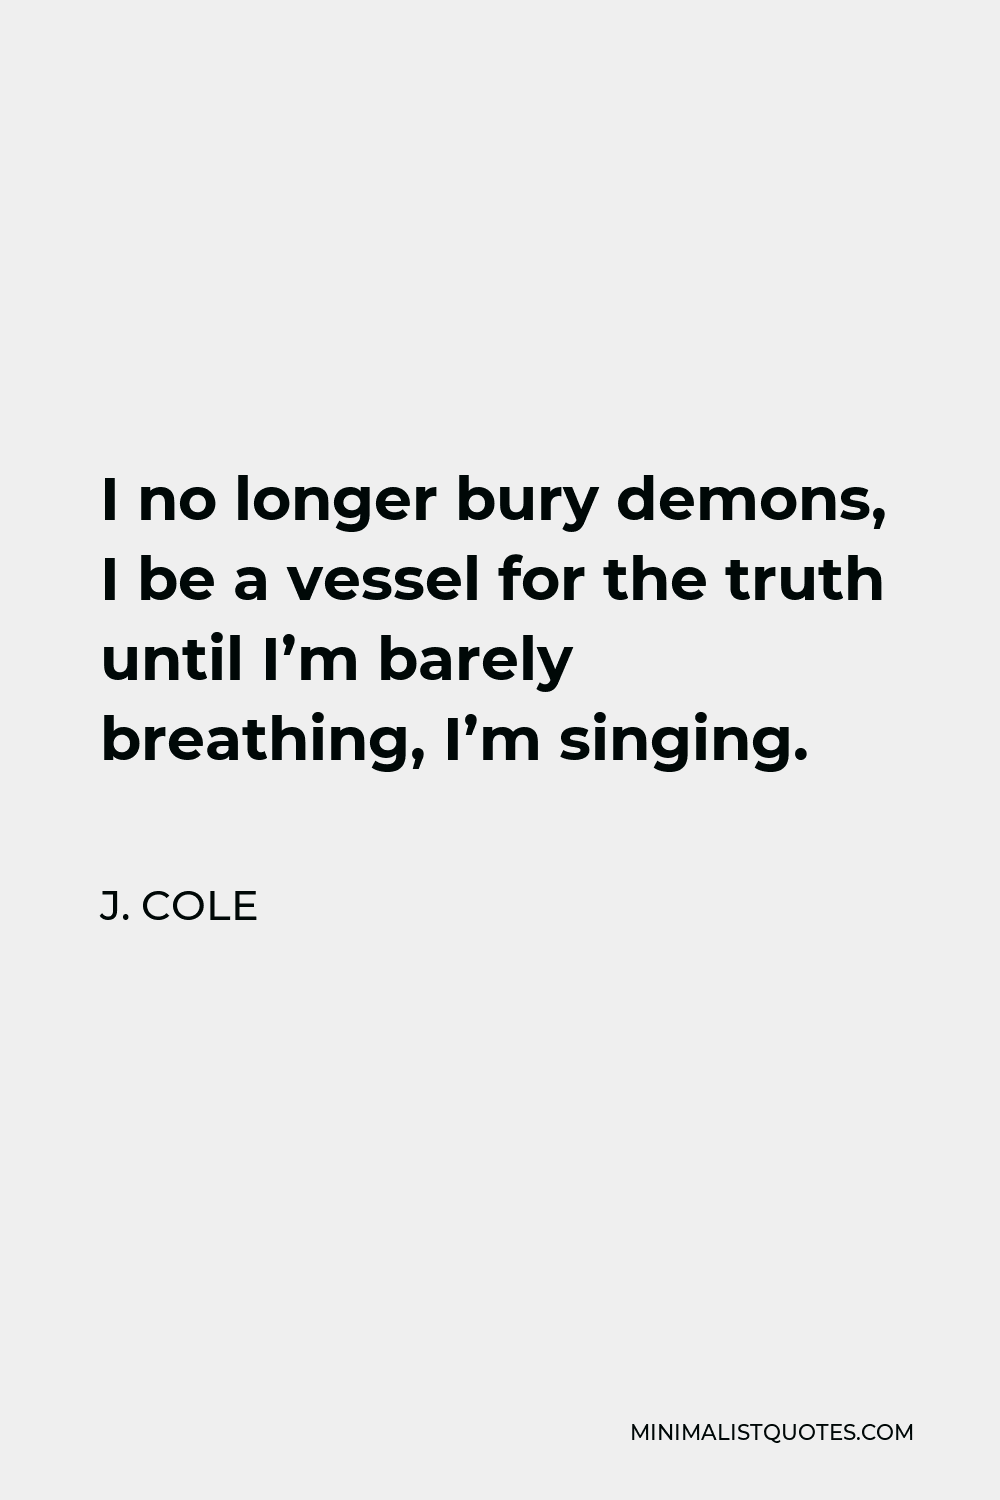 J. Cole Quote - I no longer bury demons, I be a vessel for the truth until I’m barely breathing, I’m singing.